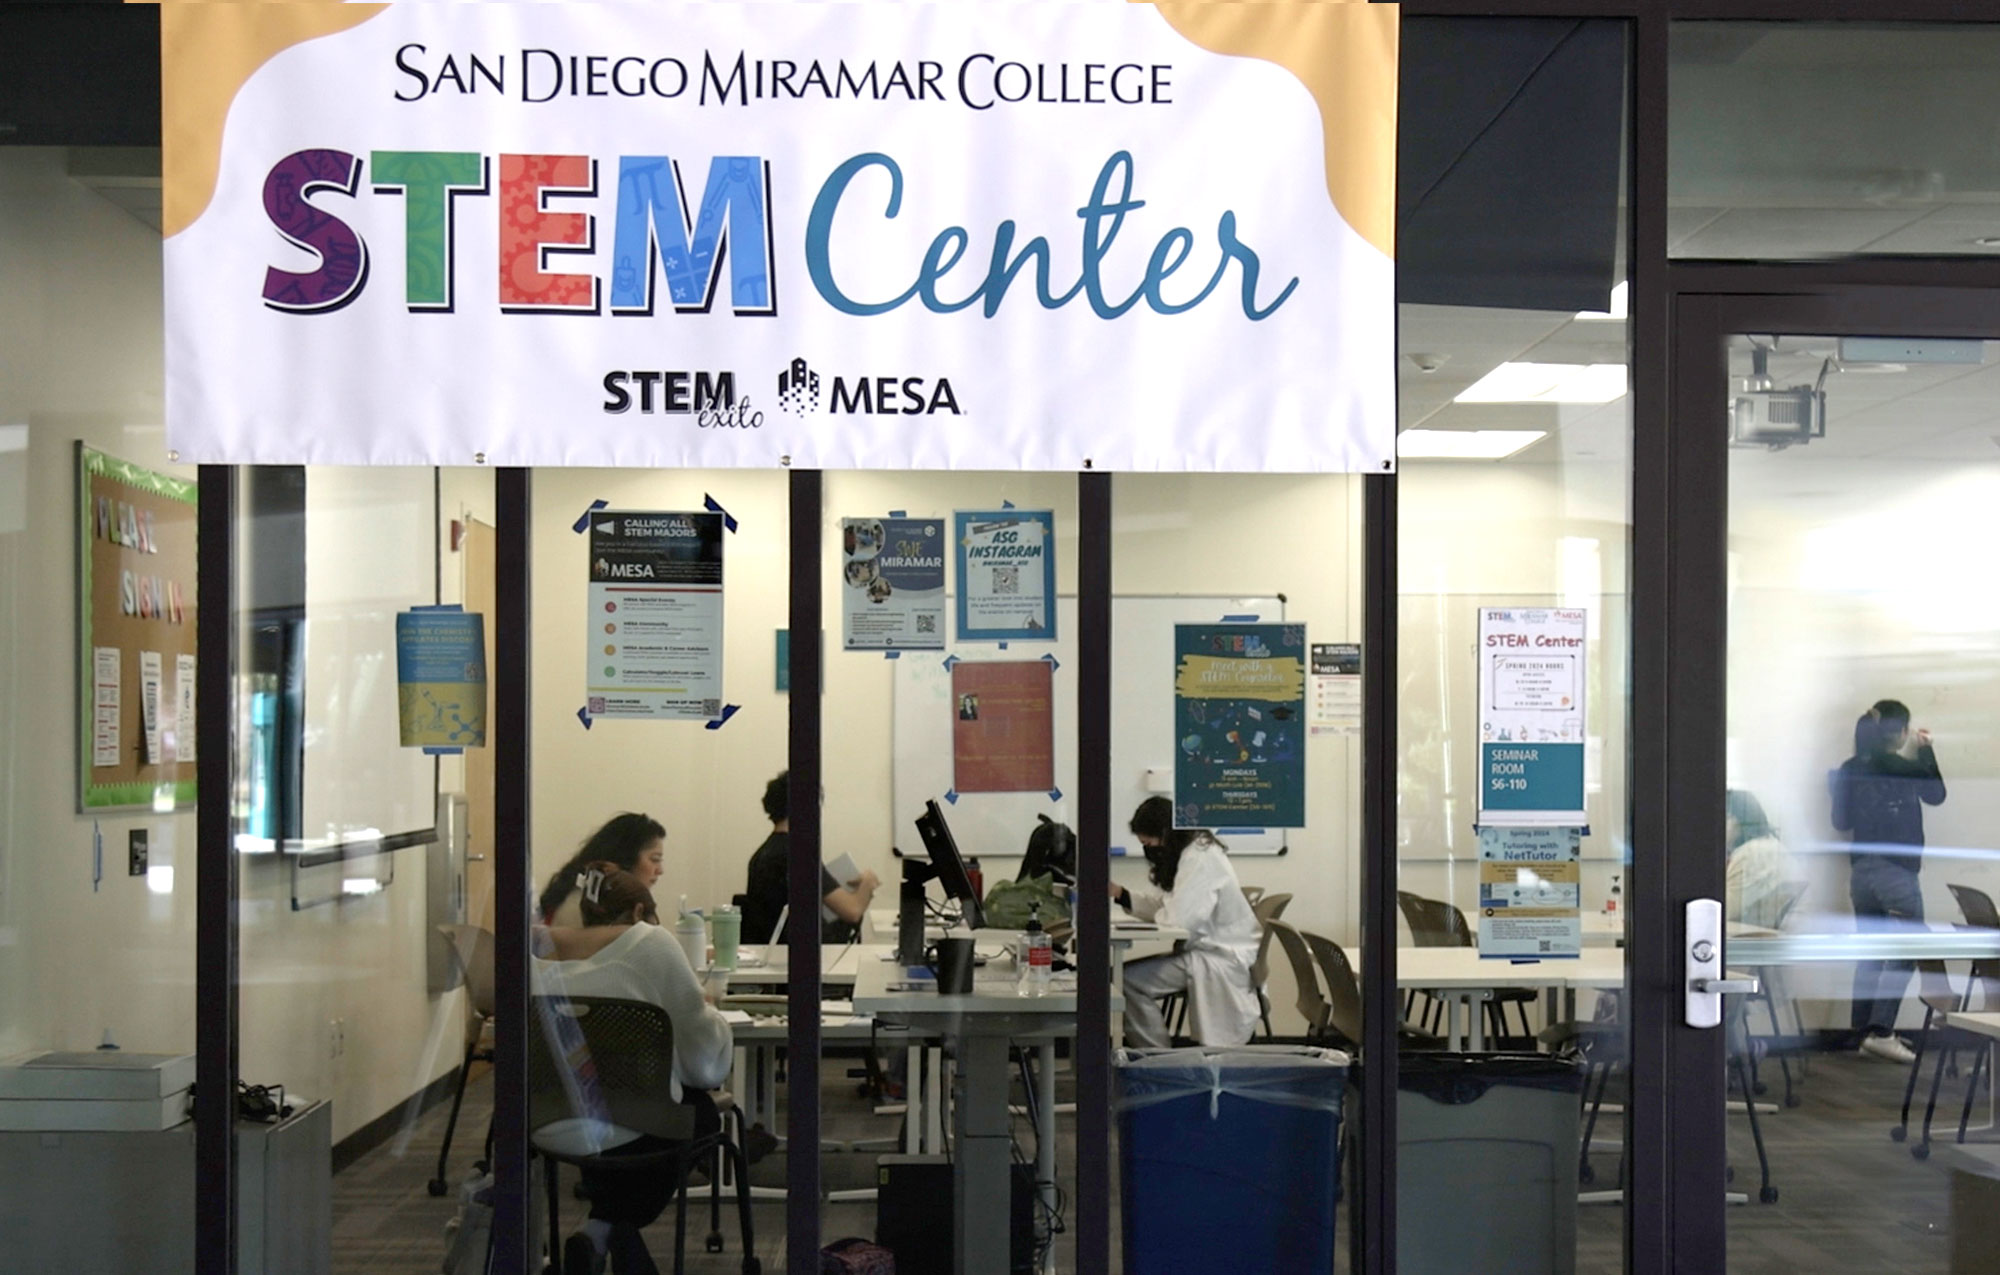 At large Stem banner hangs in front of the glass panels at the entrance of the tutoring center